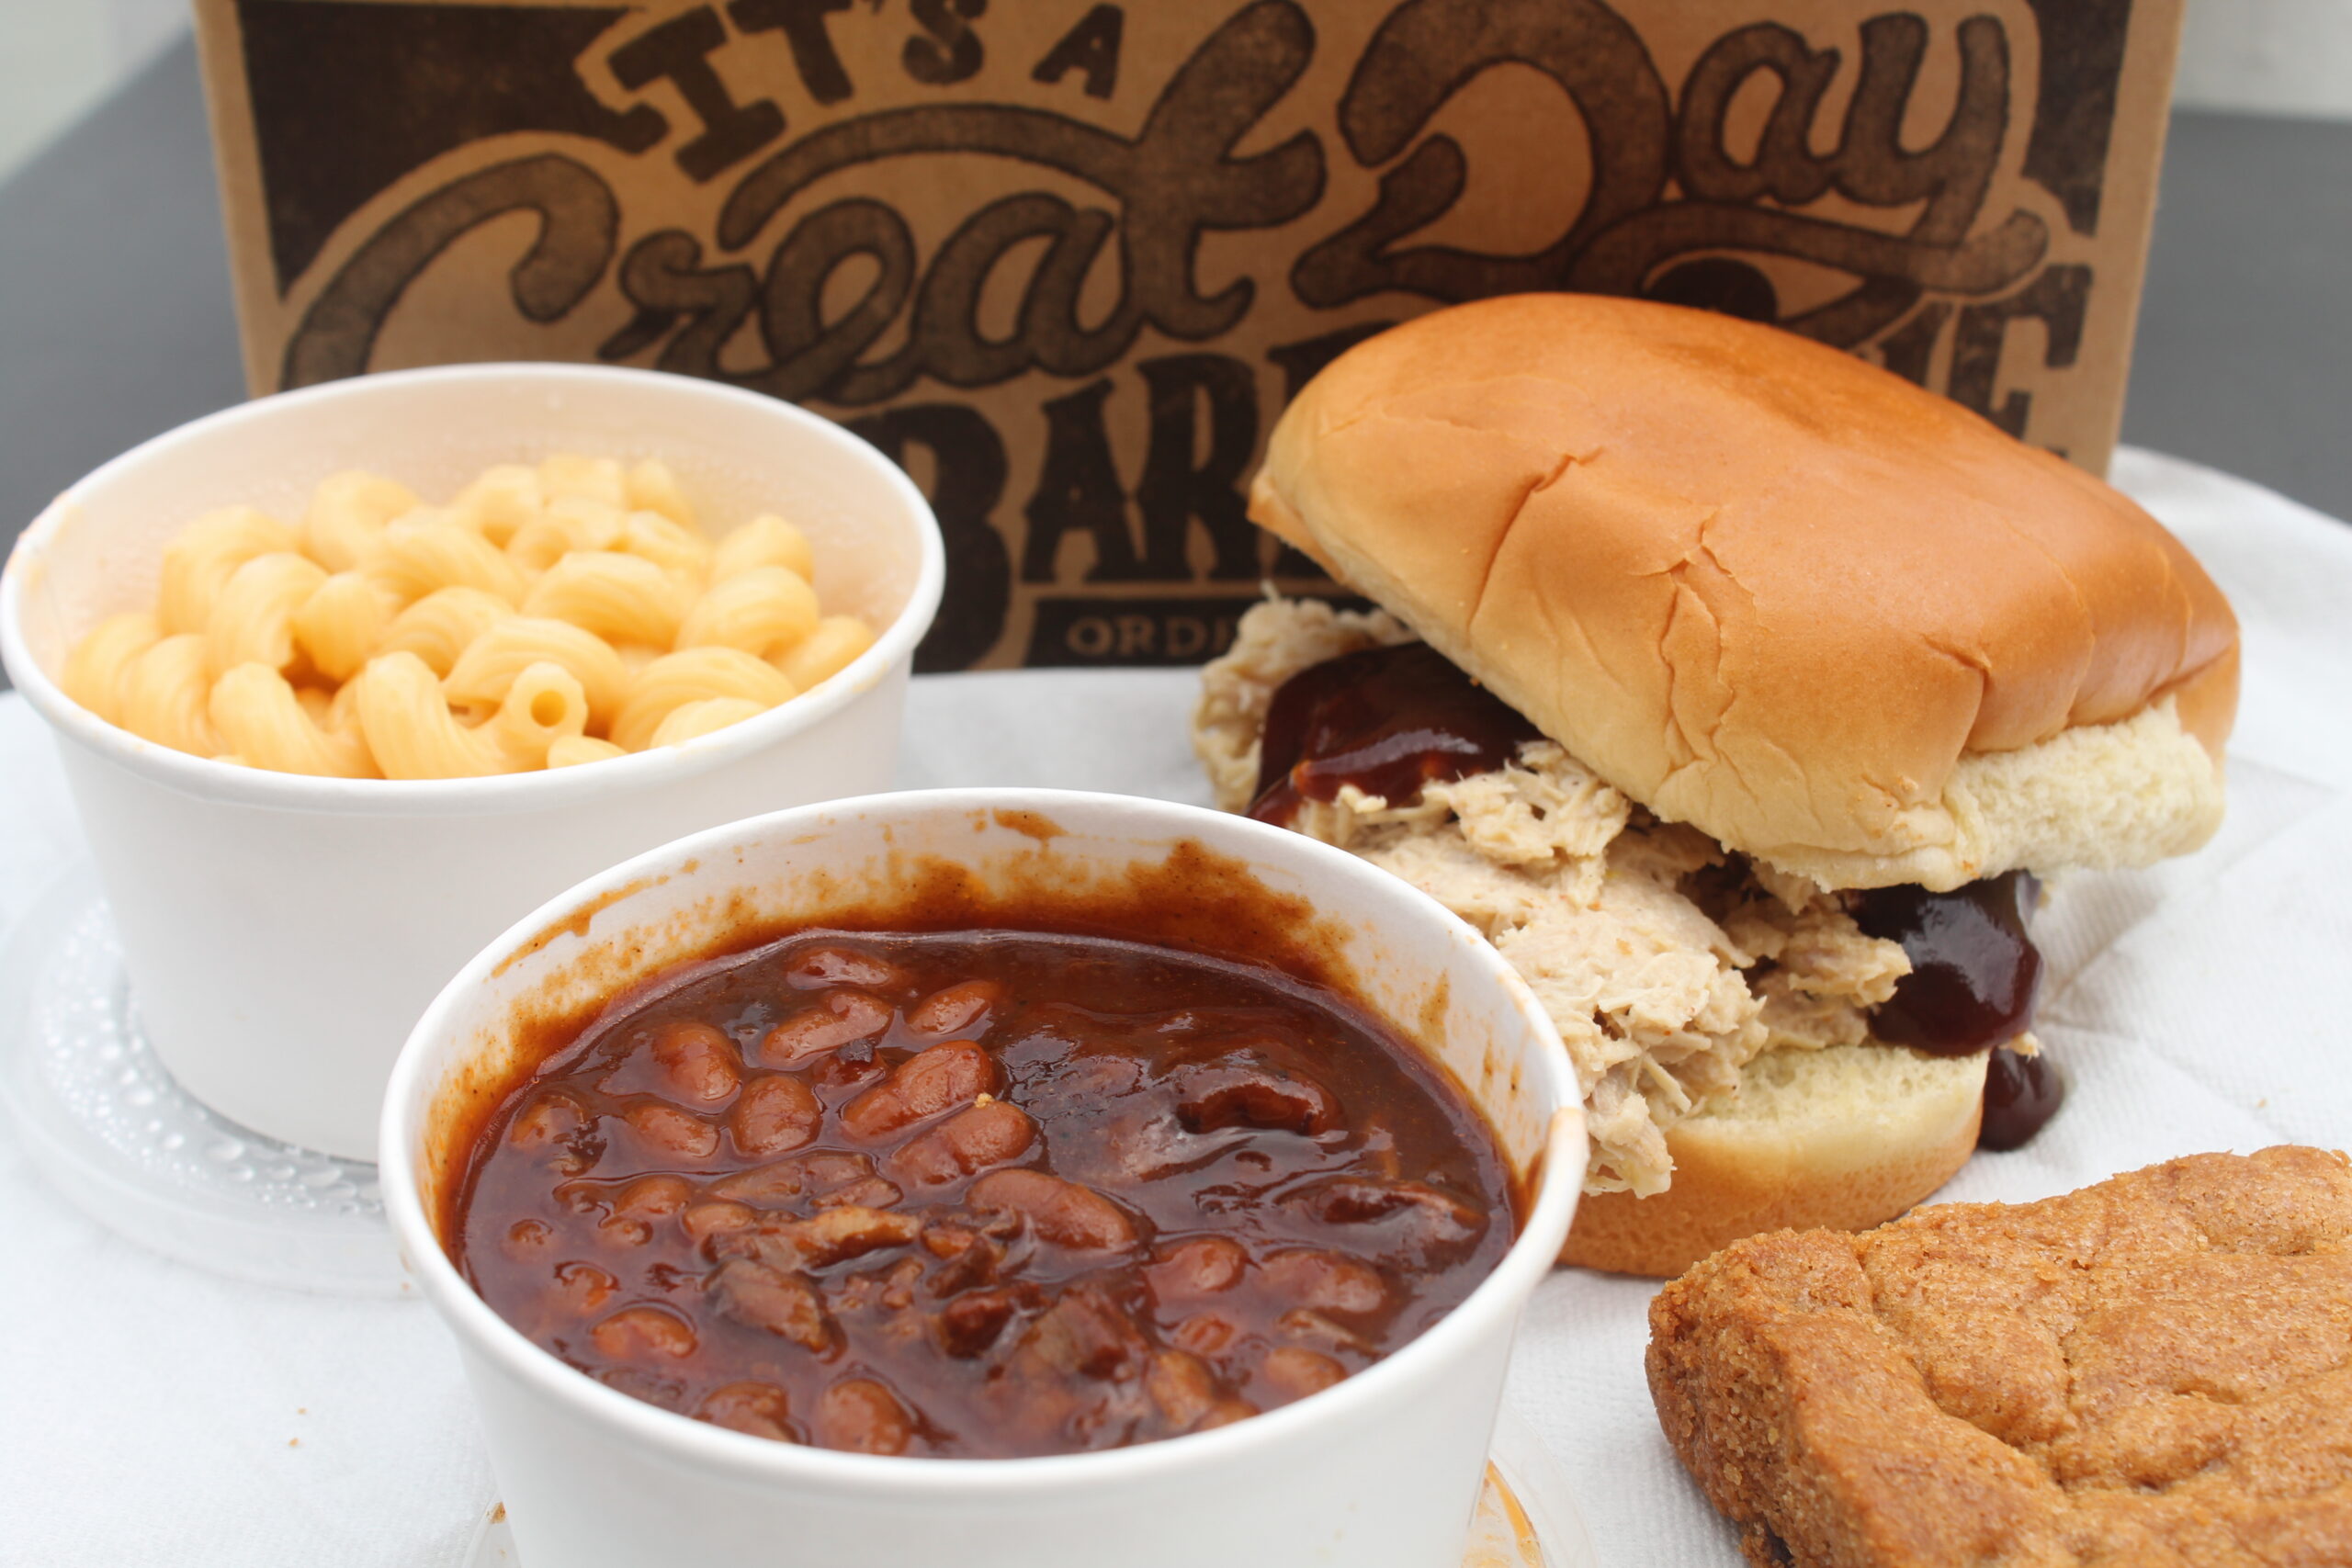 A barbeque sandwich, bowl of macaroni and cheese, bowl of baked beans, and a blondie dessert.